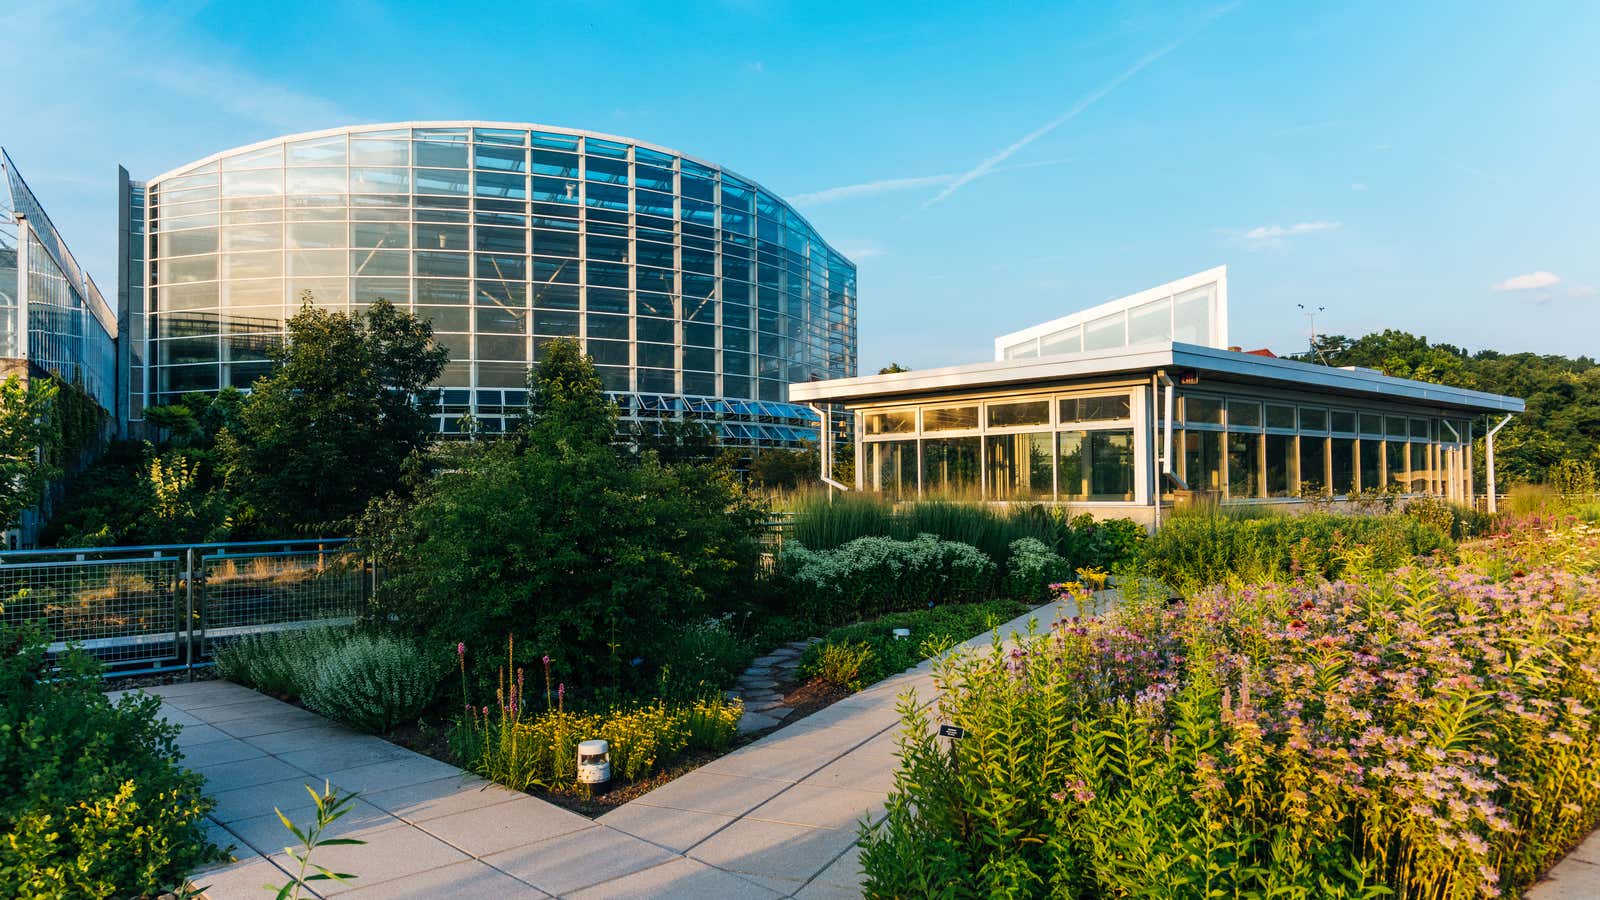 CSL, located in Pittsburgh, is one of the most eco-friendly buildings in the world.